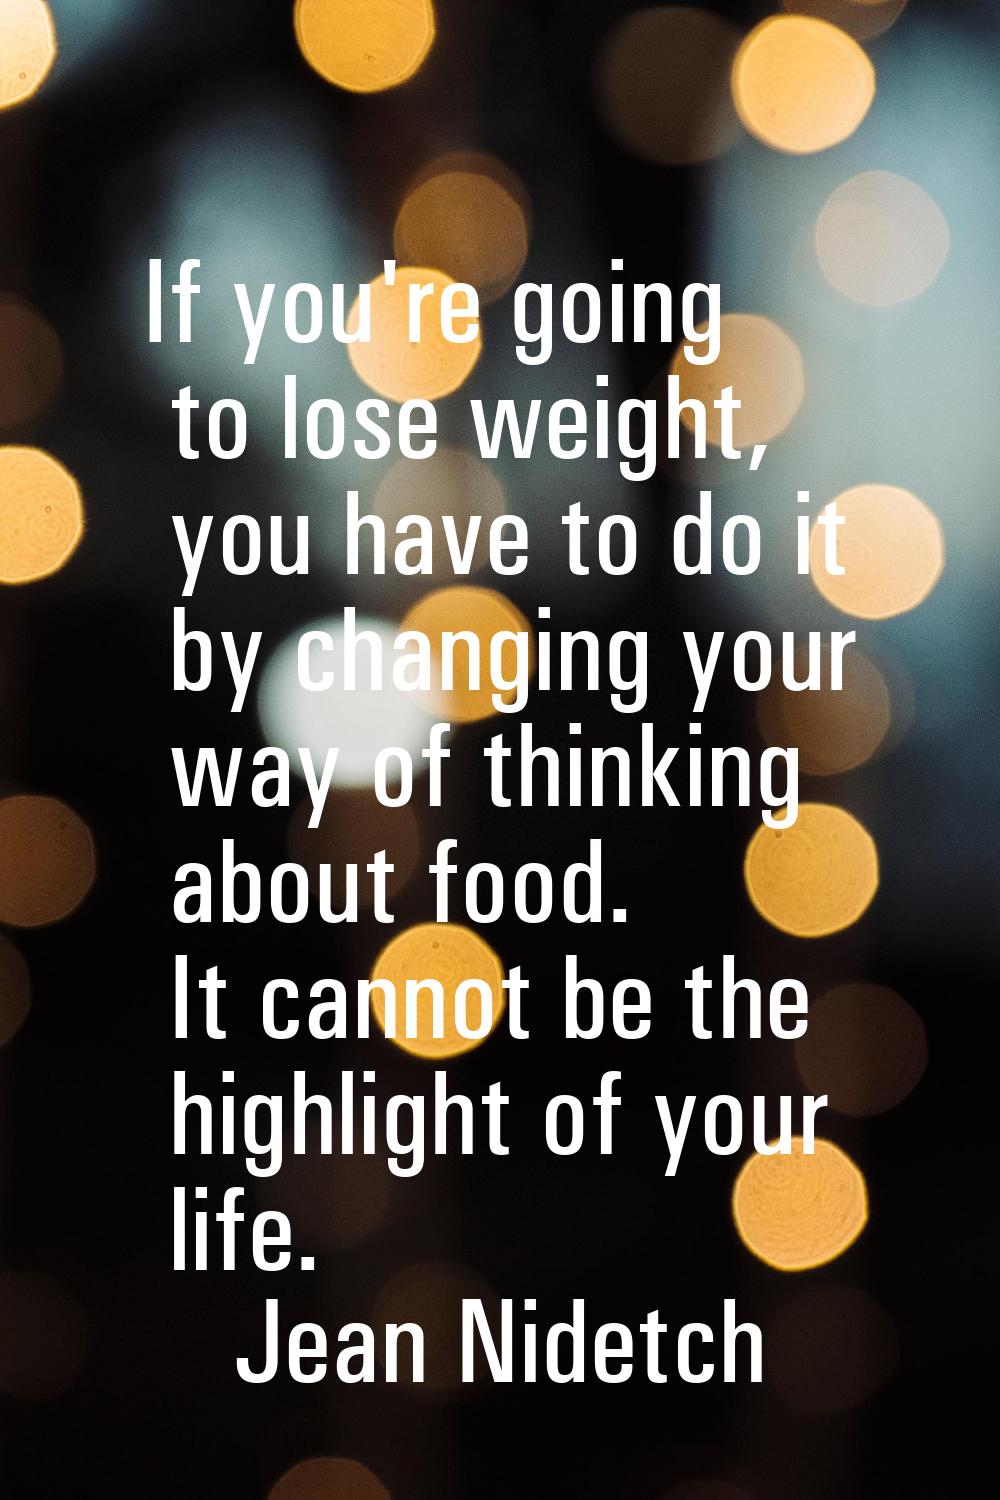 If you're going to lose weight, you have to do it by changing your way of thinking about food. It c